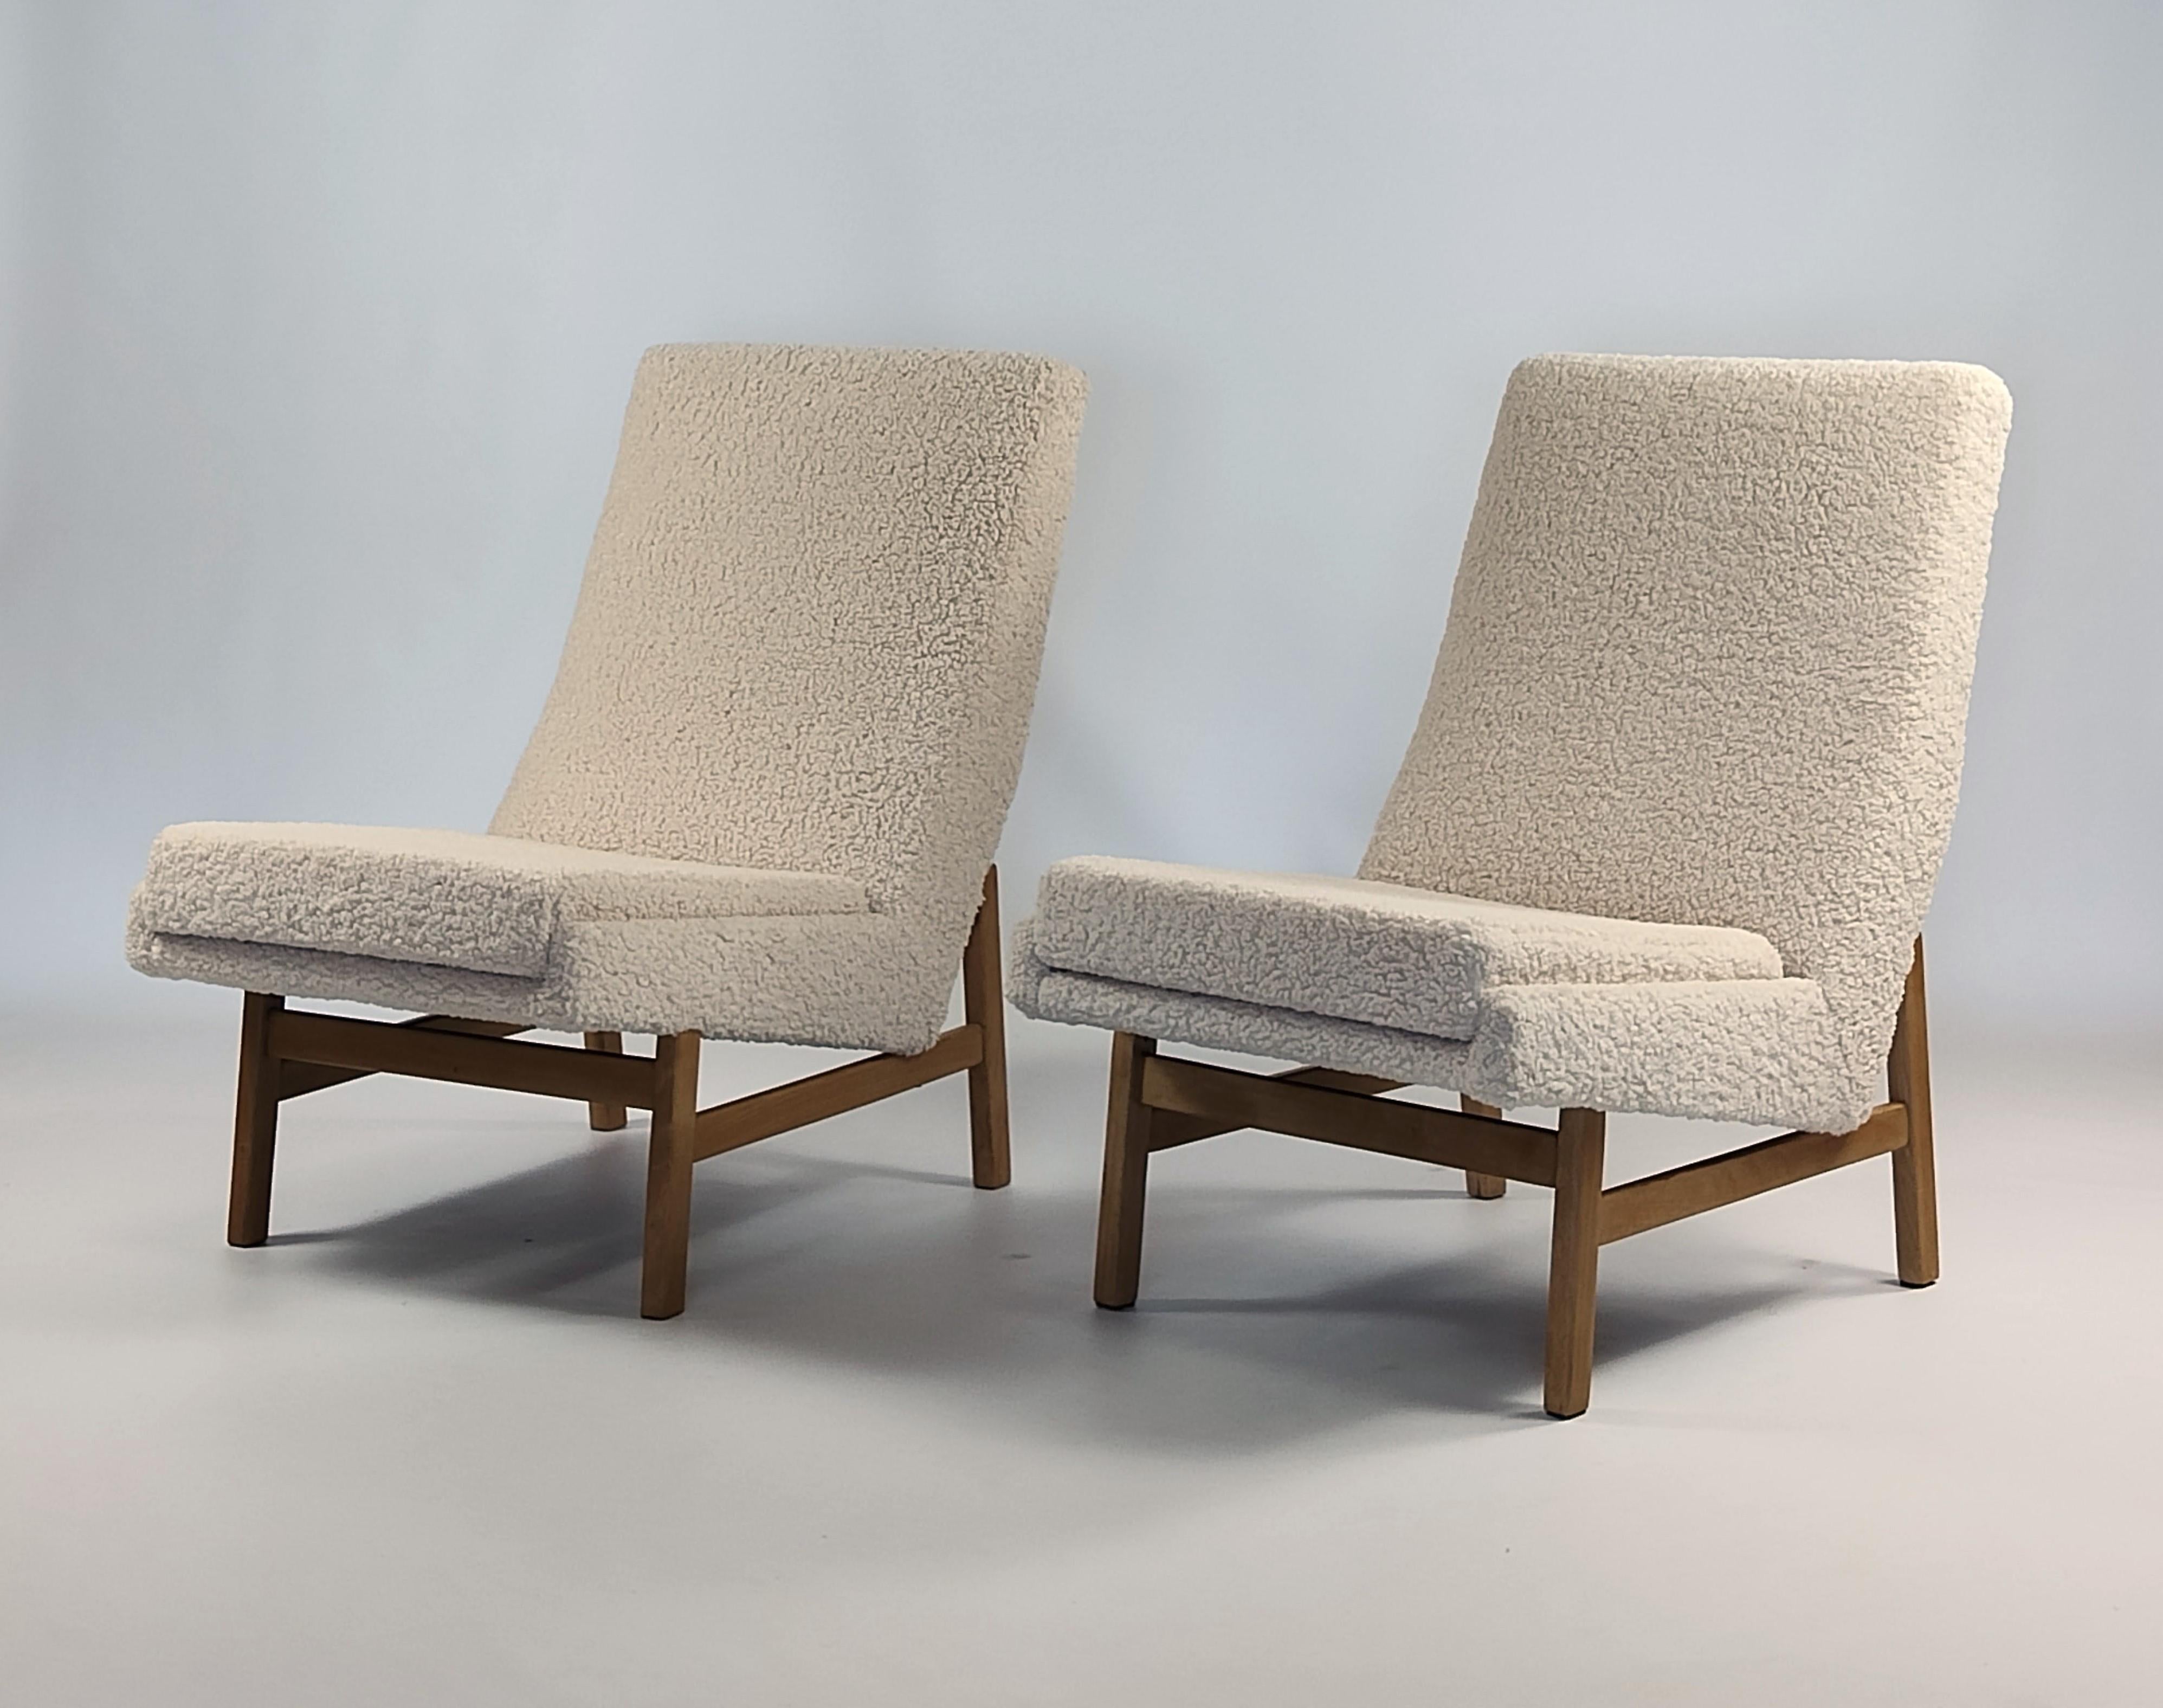 French Ash & Cream Boucle Chairs by Guariche, Mortier, Motte for ARP, France, 1955 For Sale